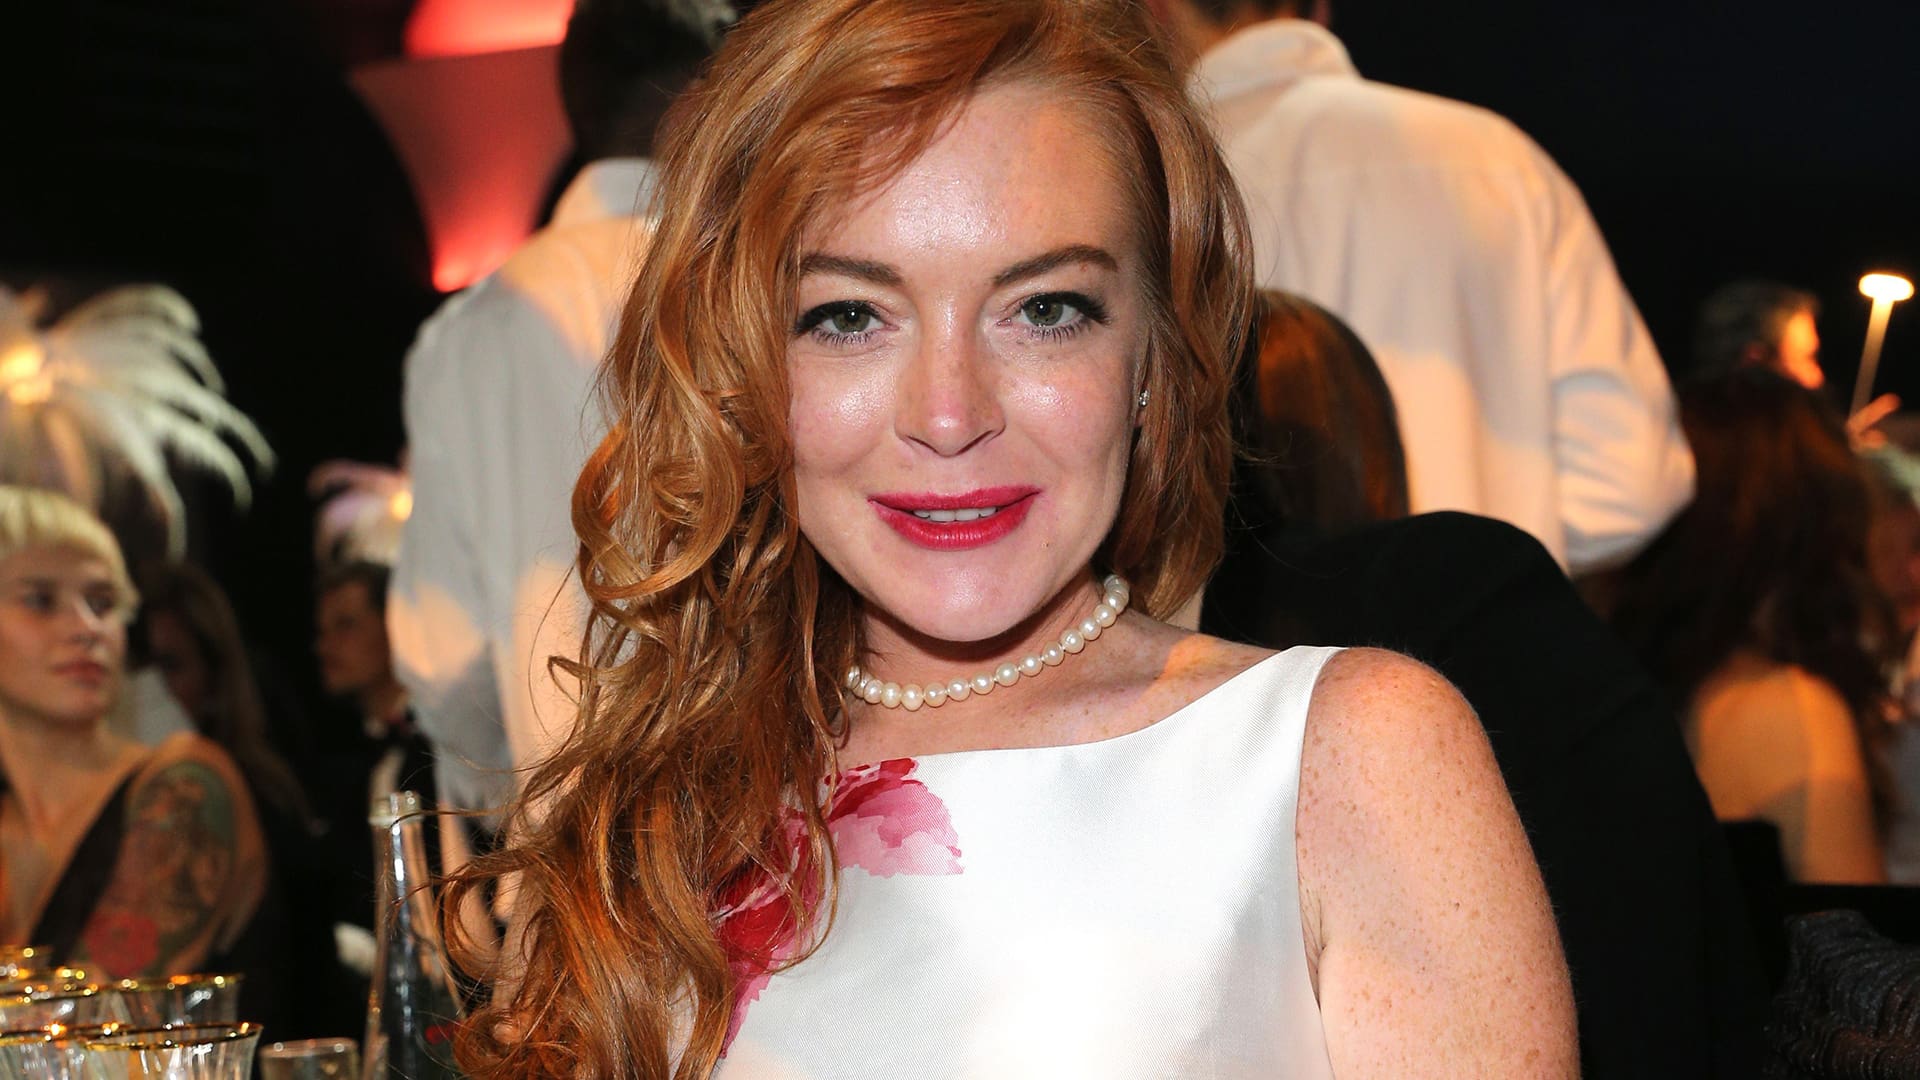 ”lindsay-lohan-shows-off-her-fit-body-in-new-fitness-pic-and-fans-are-very-impressed”